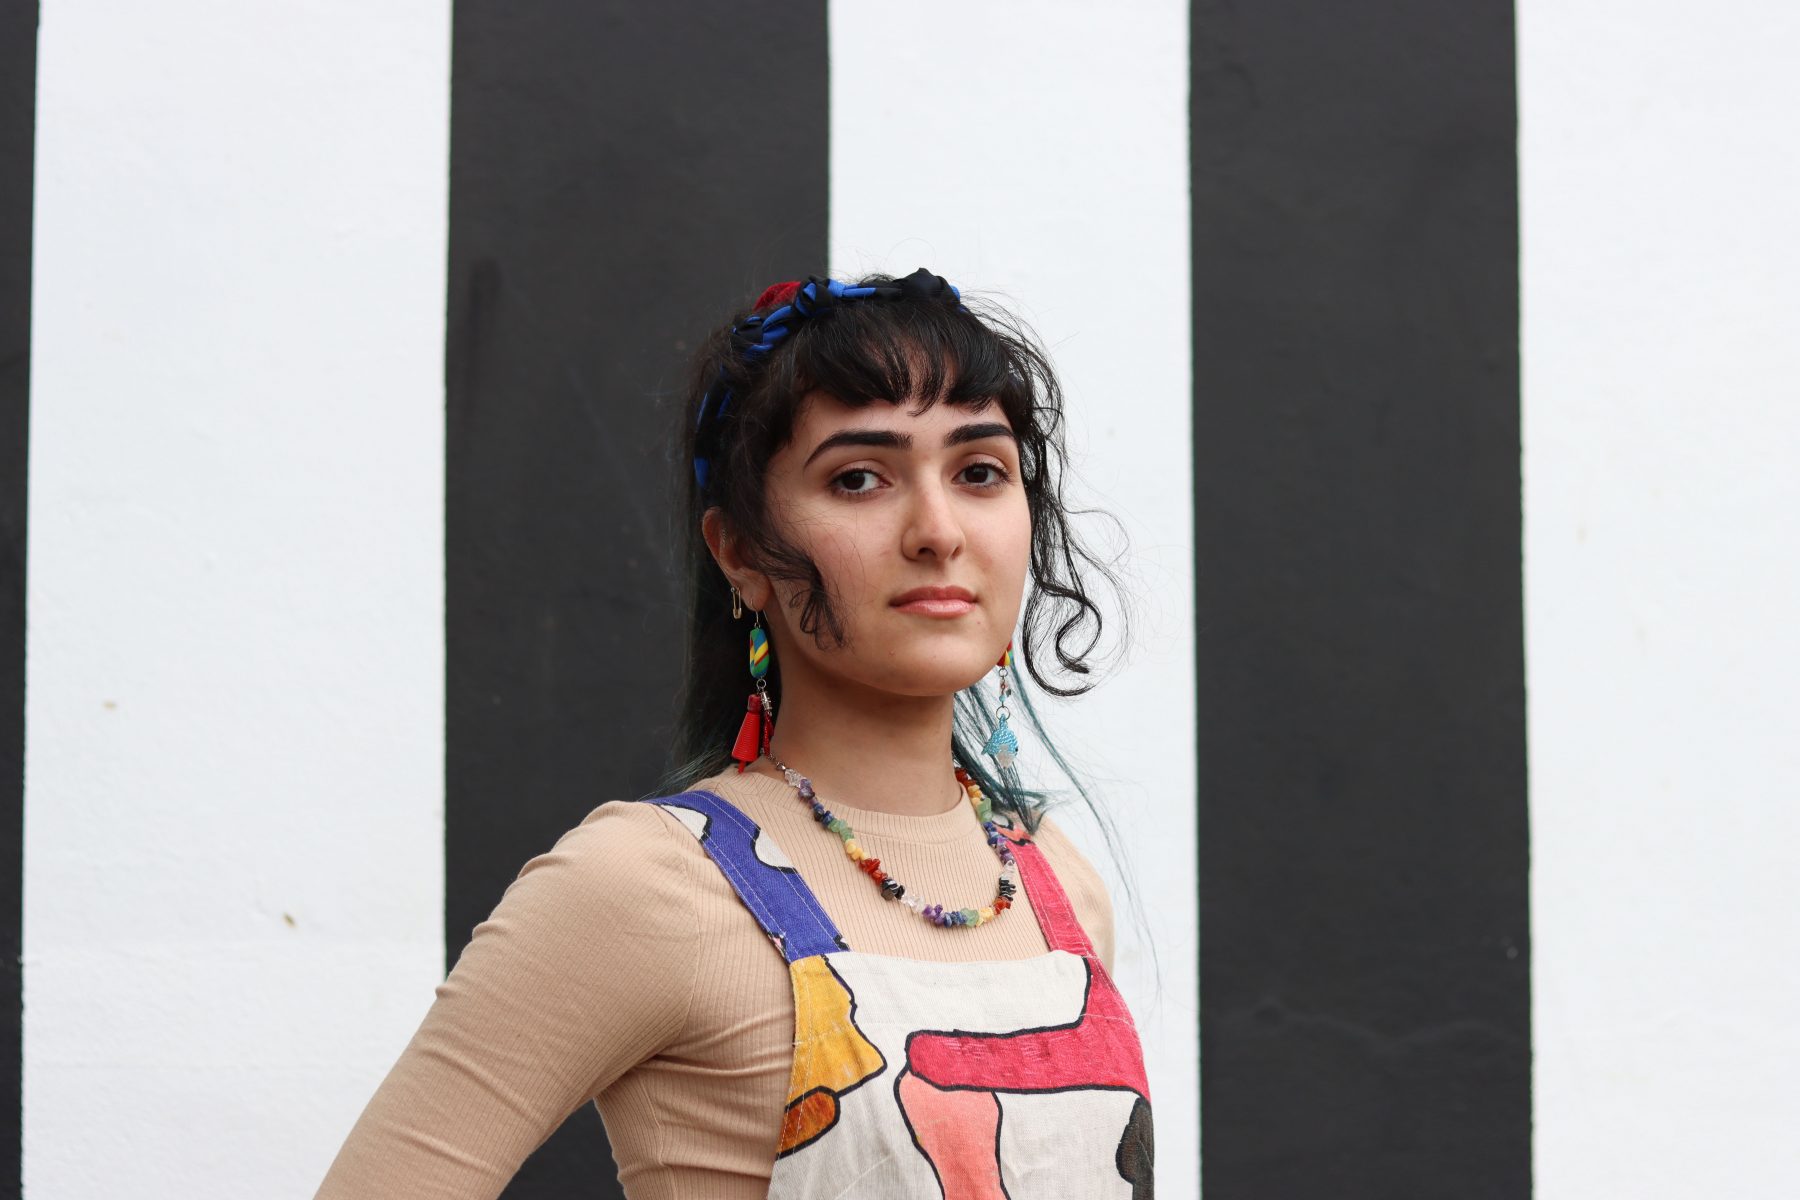 A portrait of Baran standing in front of a vertical striped black and white wall. Baran is wearing very colourful overalls and cool earrings.